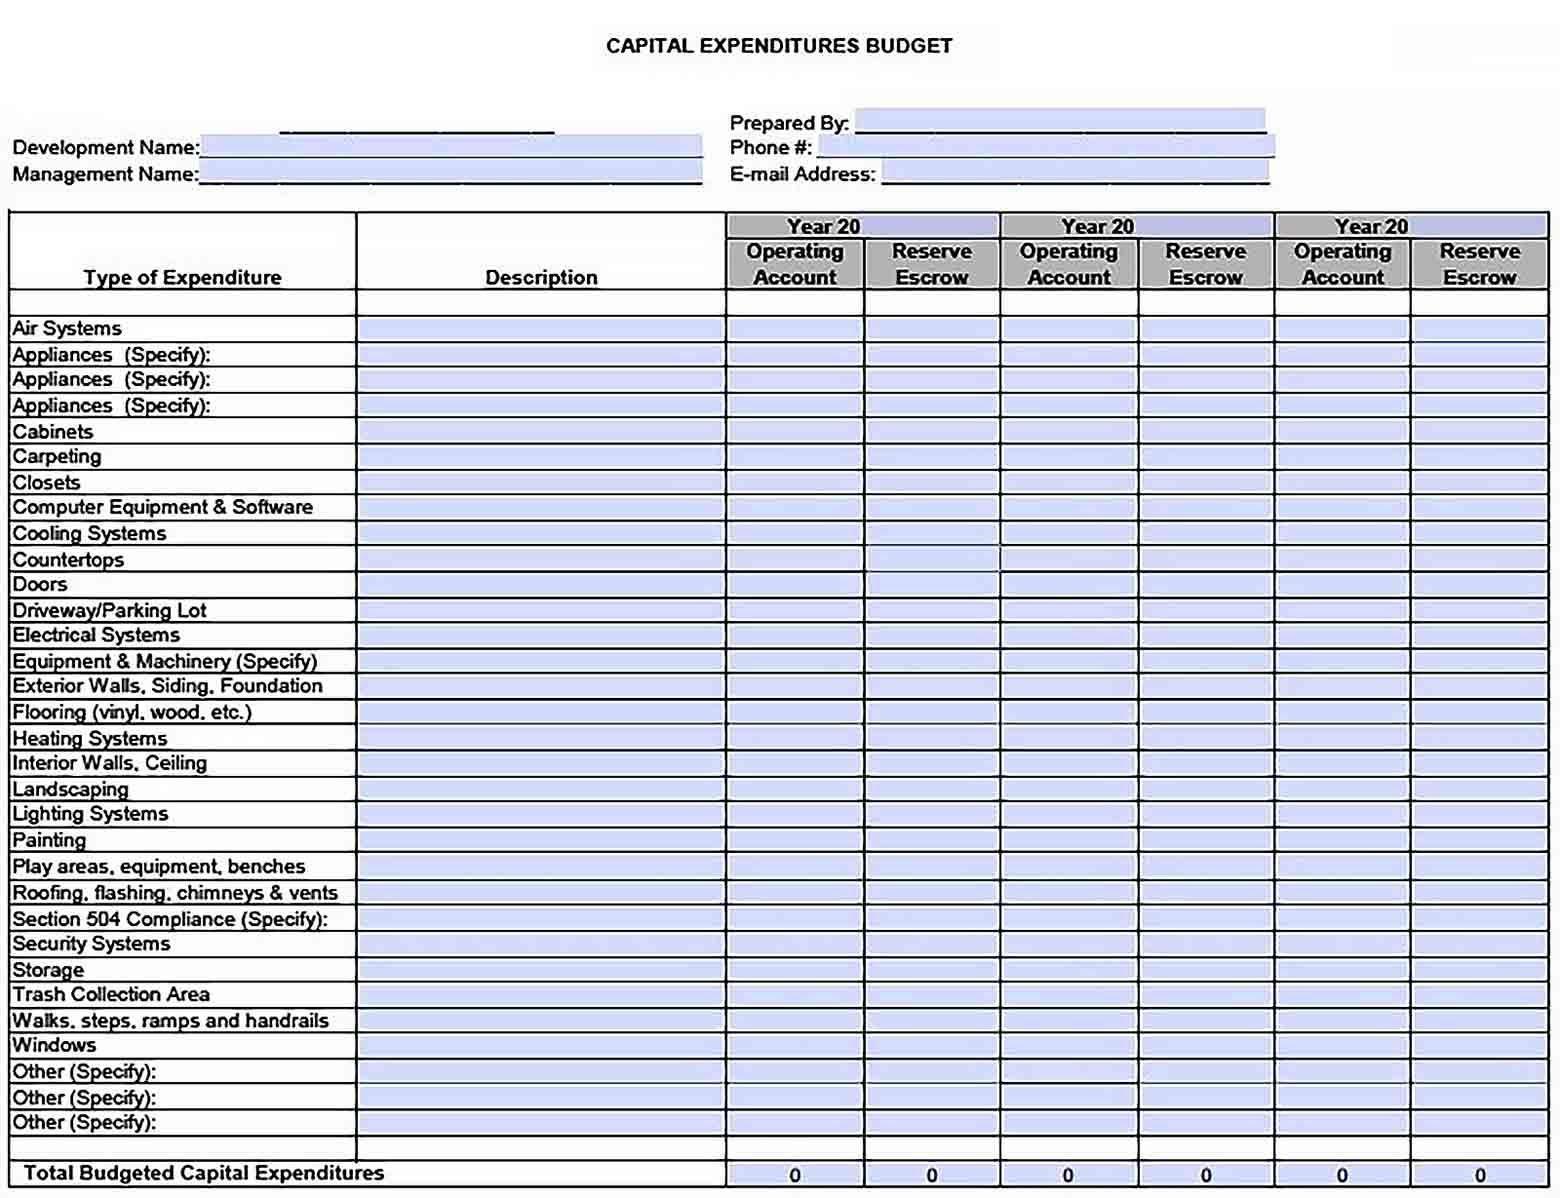 Capital Expenditure Budget Template - culturopedia With Regard To Expenditure Budget Template With Regard To Expenditure Budget Template